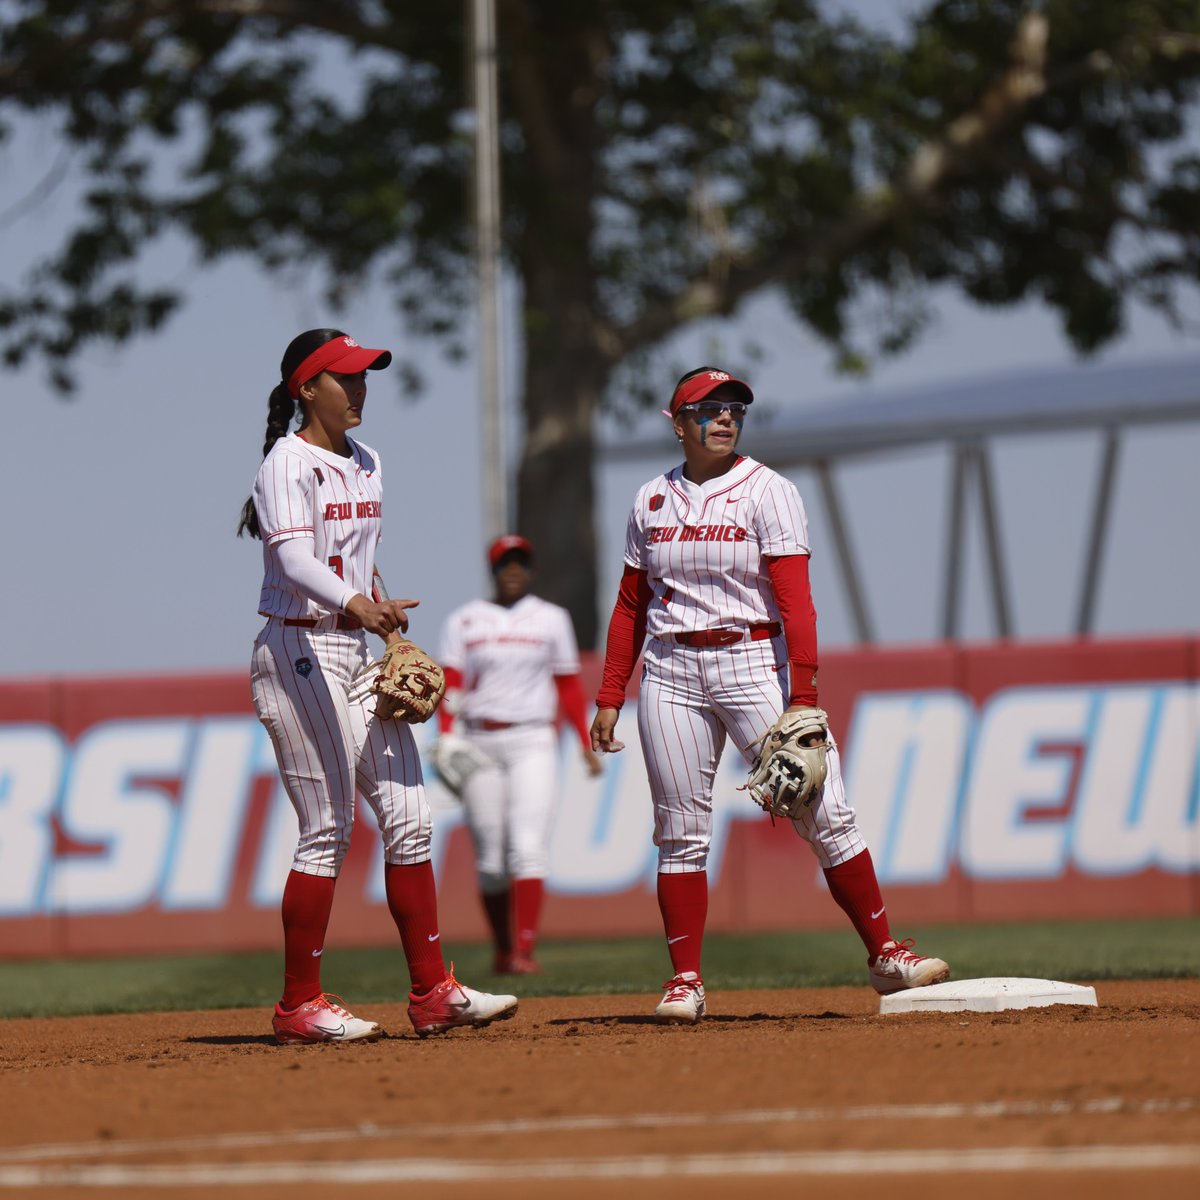 UNM turned 4 double plays and McKenna, Taylor (W) and Amber (S) combined for 6 scoreless innings as the Lobos earned the series win and their 6th win in the last 8 games. RECAP: bit.ly/44r0hSl #GoLobos